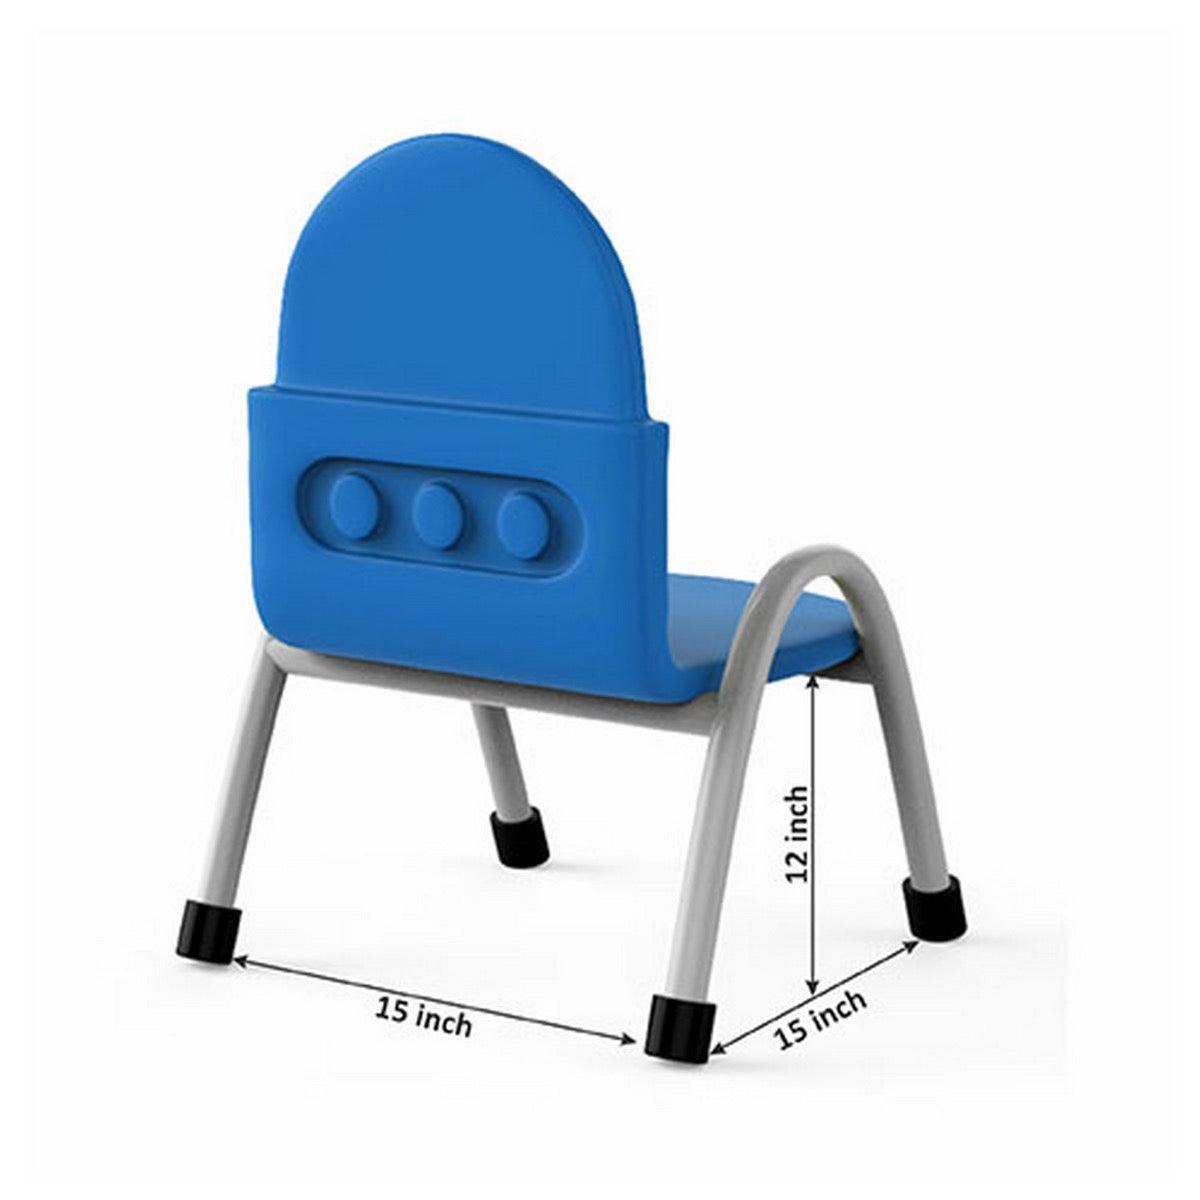 Ok Play Robo Chair, Study Chair, Sturdy And Durable Chair, Plastic Chair, Perfect For Home, Creches And School, Blue, 5 to 10 Years, Height 12 Inches